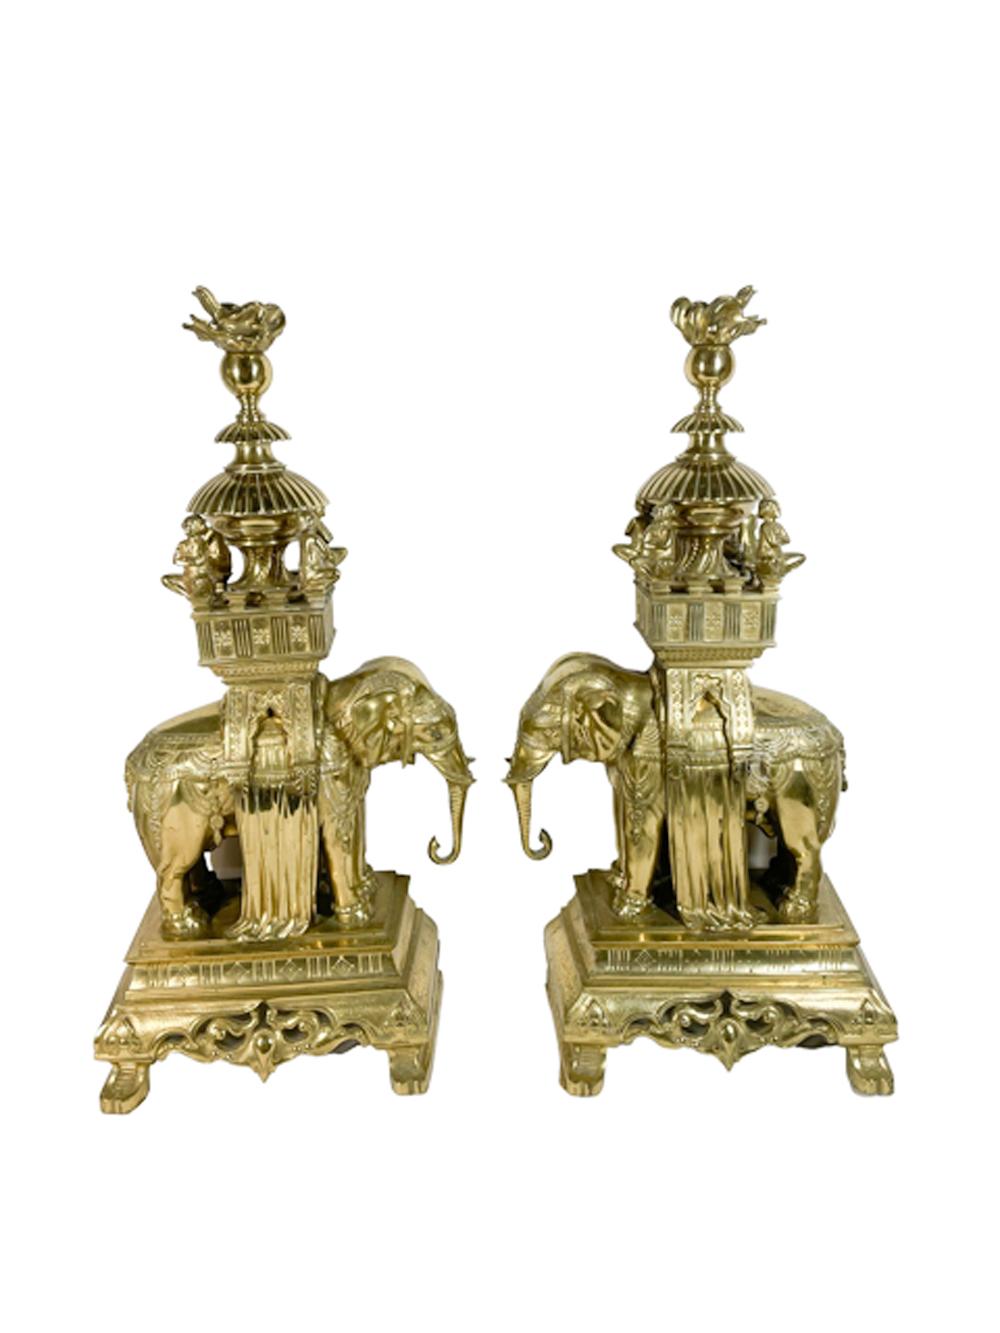 A large pair of cast brass garnitures or chenets in the Orientalist or Anglo-Indian taste featuring full bodied caparisoned elephants carrying an elaborate howdah (saddle) with a scholar seated at each corner beneath a central domed cover and topped